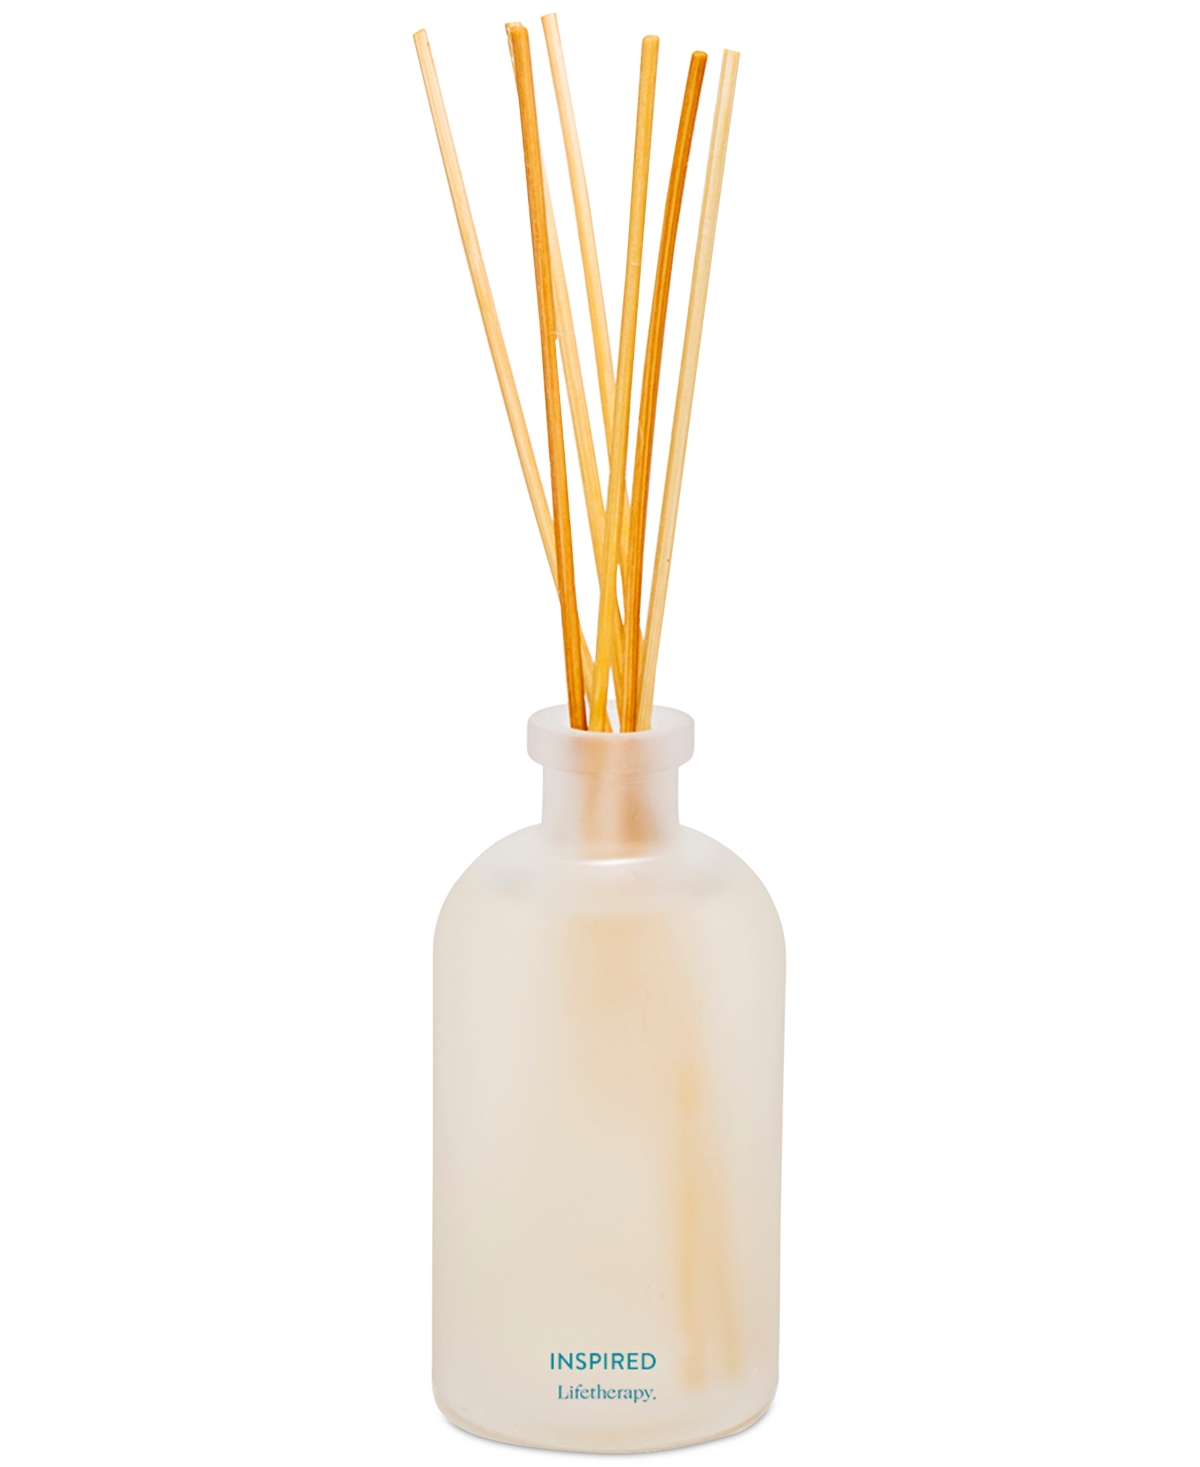 Lifetherapy Inspired Reed Diffuser, 16 oz